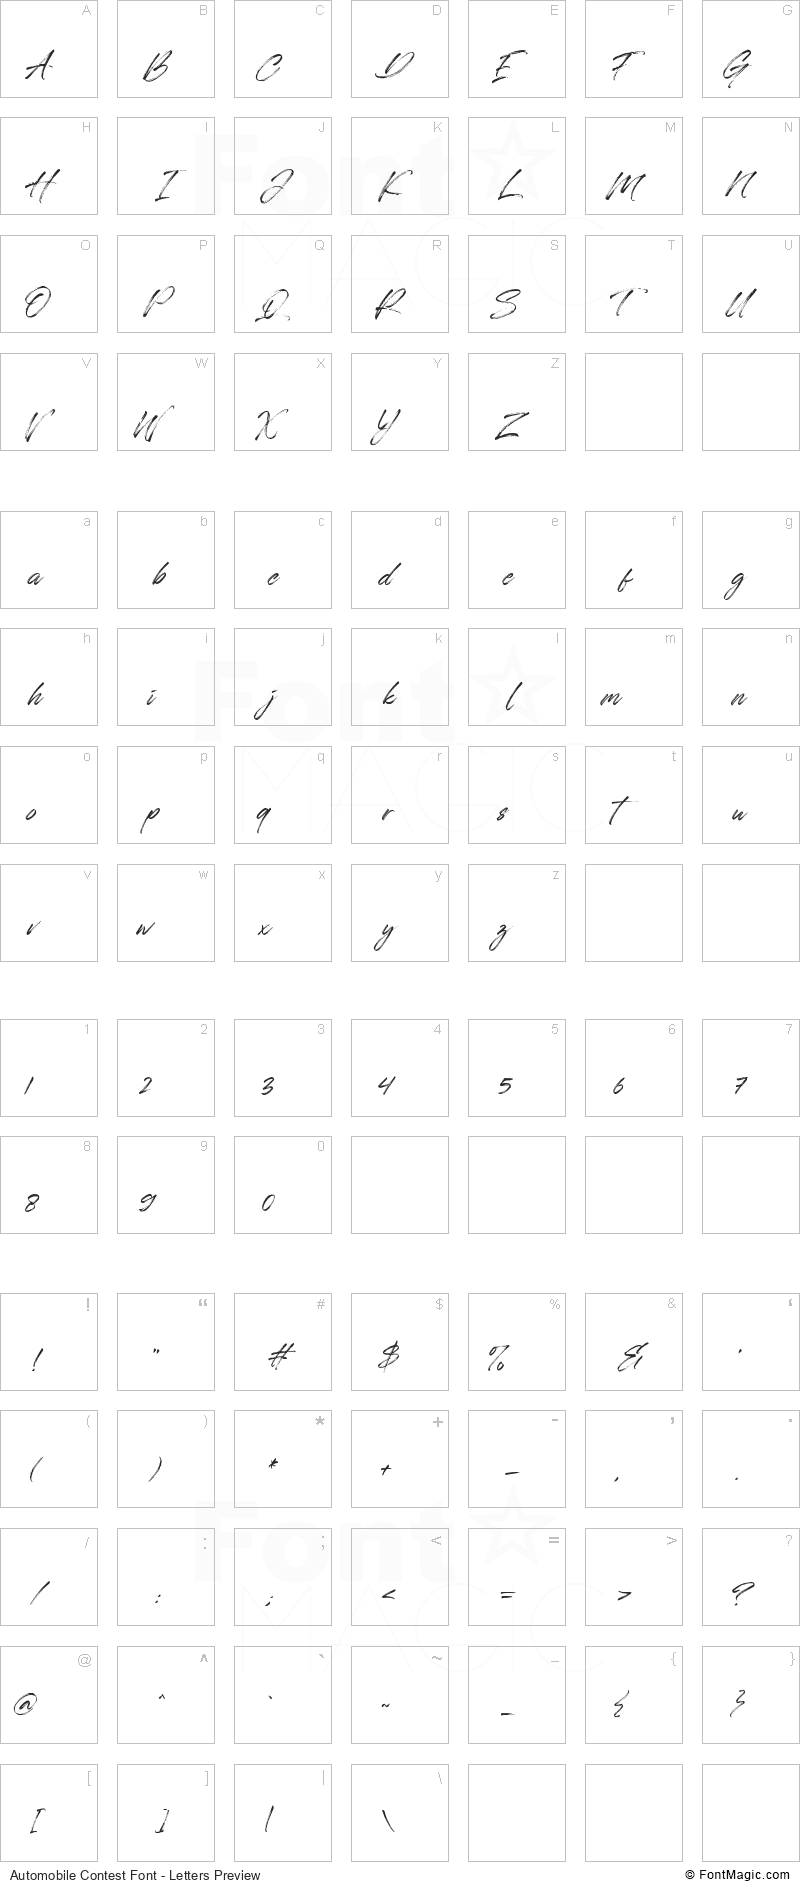 Automobile Contest Font - All Latters Preview Chart